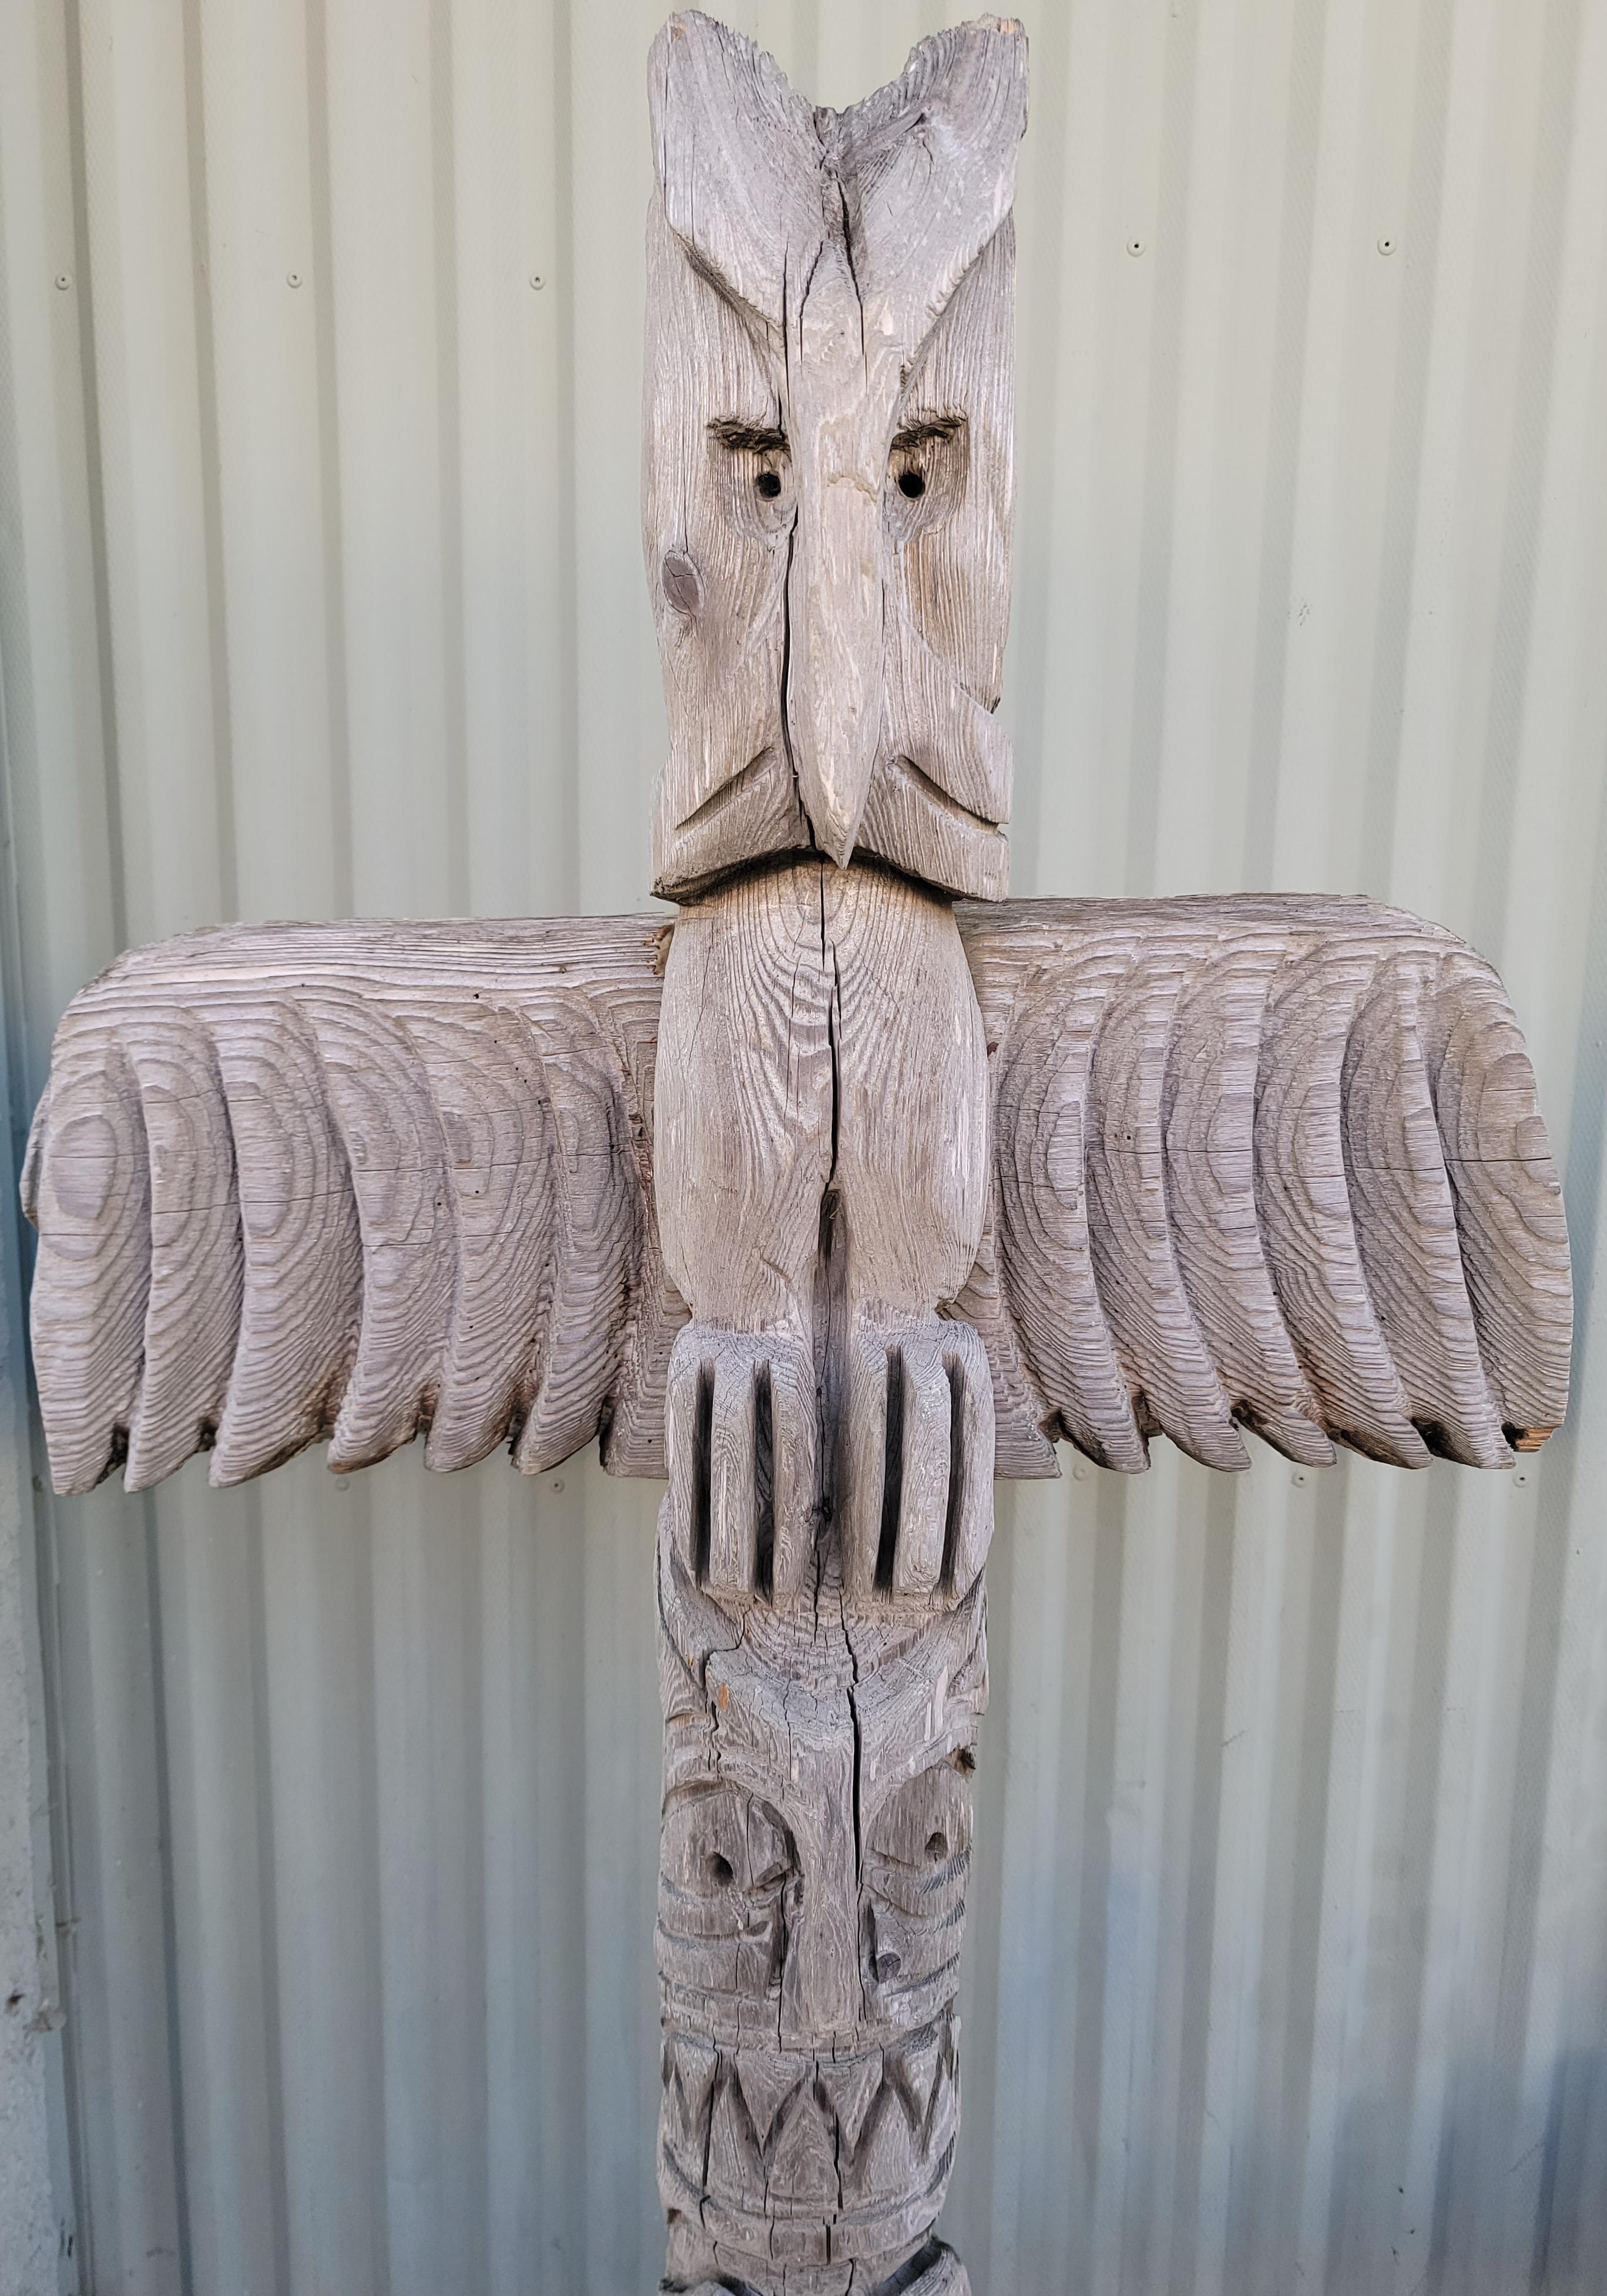 This amazing antique American Indian totem pole came from a trading post in New Mexico originally.We obtained it from a Folk art collection in California. It is in great original condition and patina as found.Probably Northwest coast.